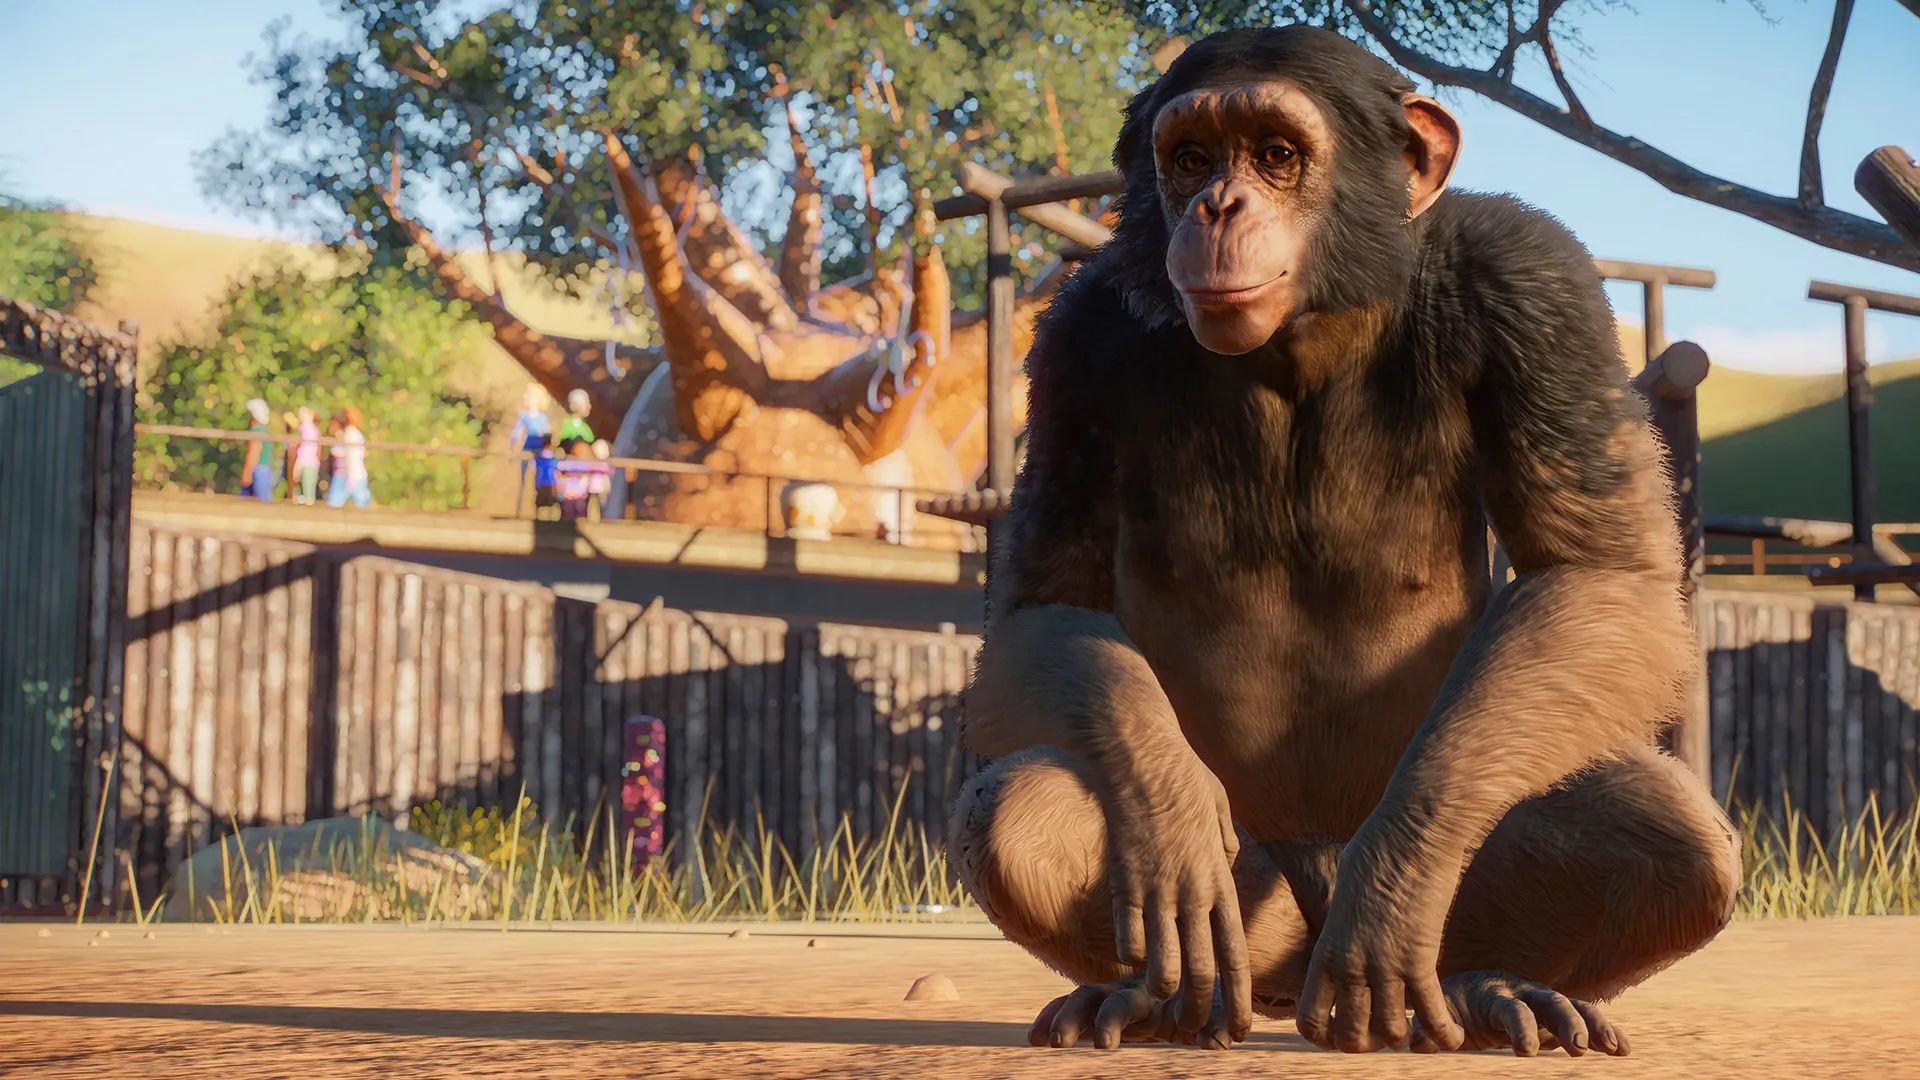 Planet Zoo is not Zoo Tycoon 2, or 3, Page 2